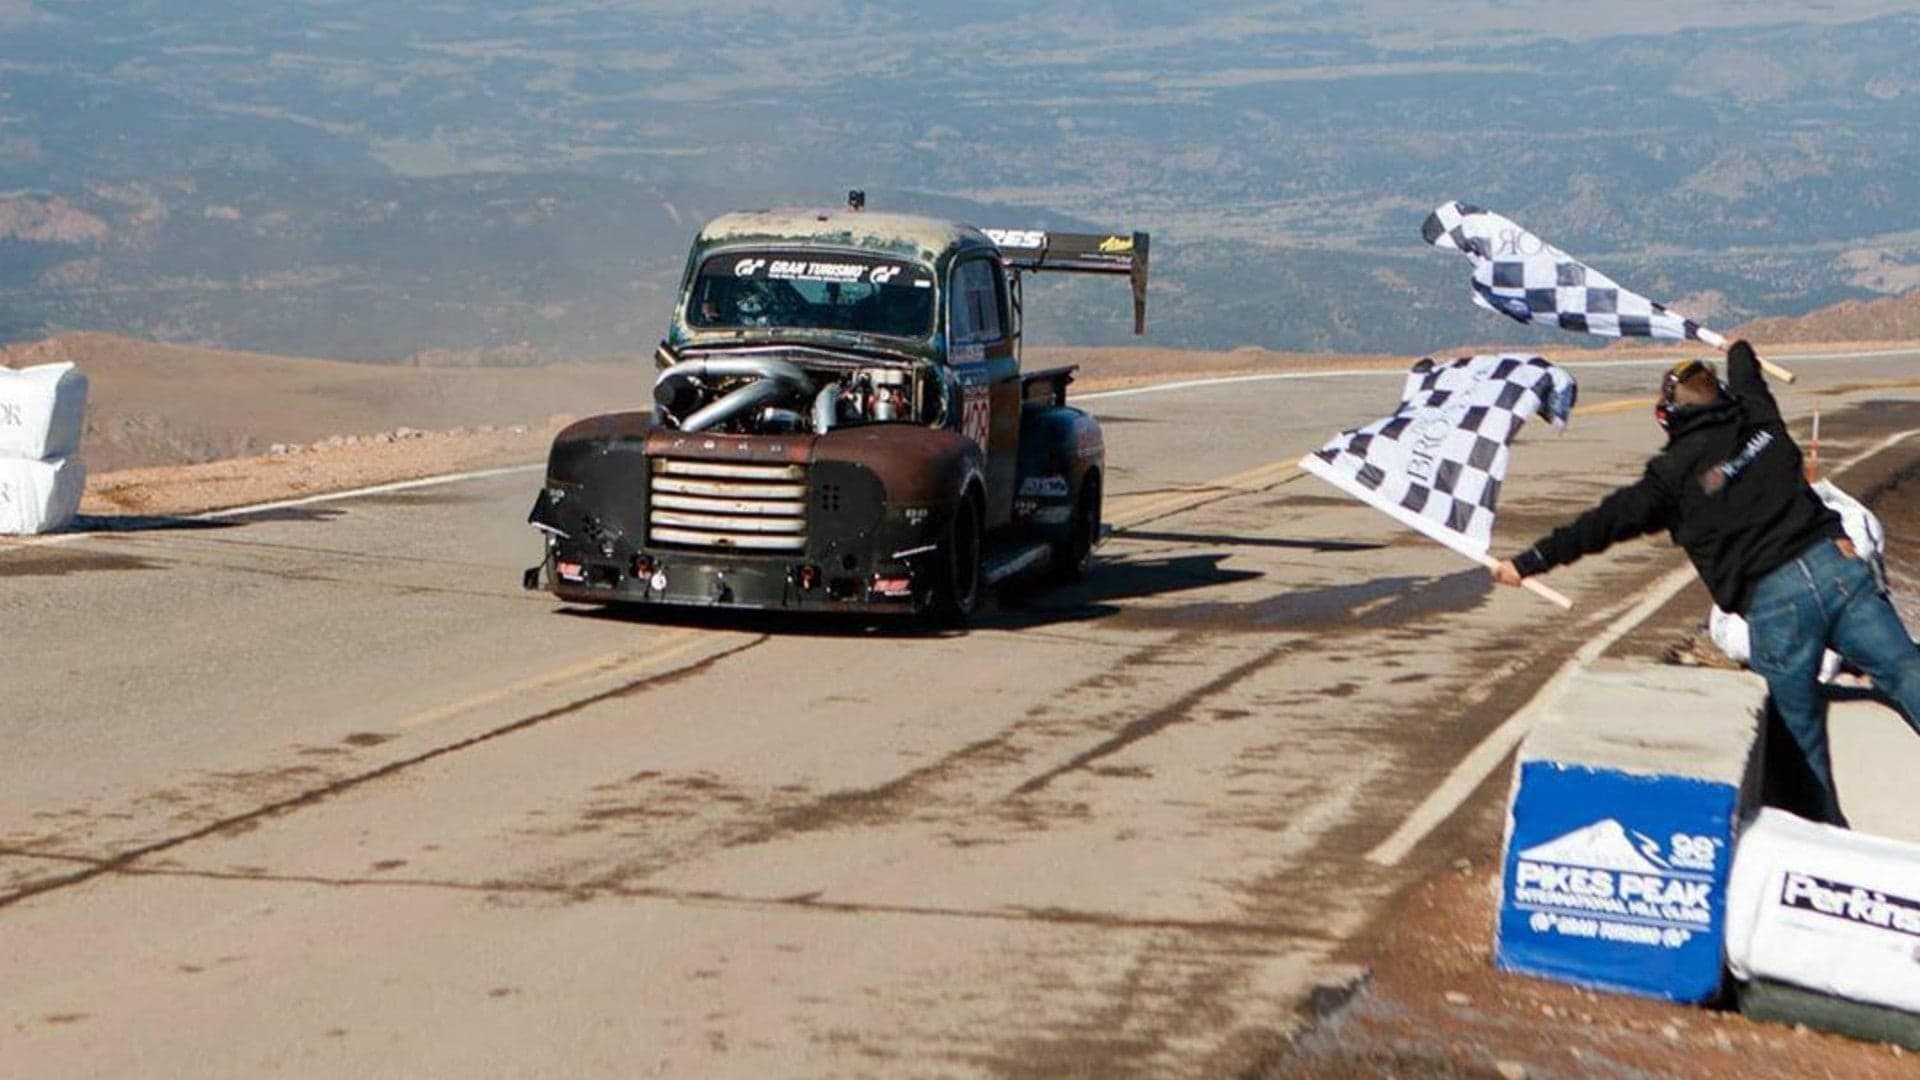 Cummins-Powered 1949 Ford Truck Is Now the Fastest Diesel Vehicle Up Pikes Peak